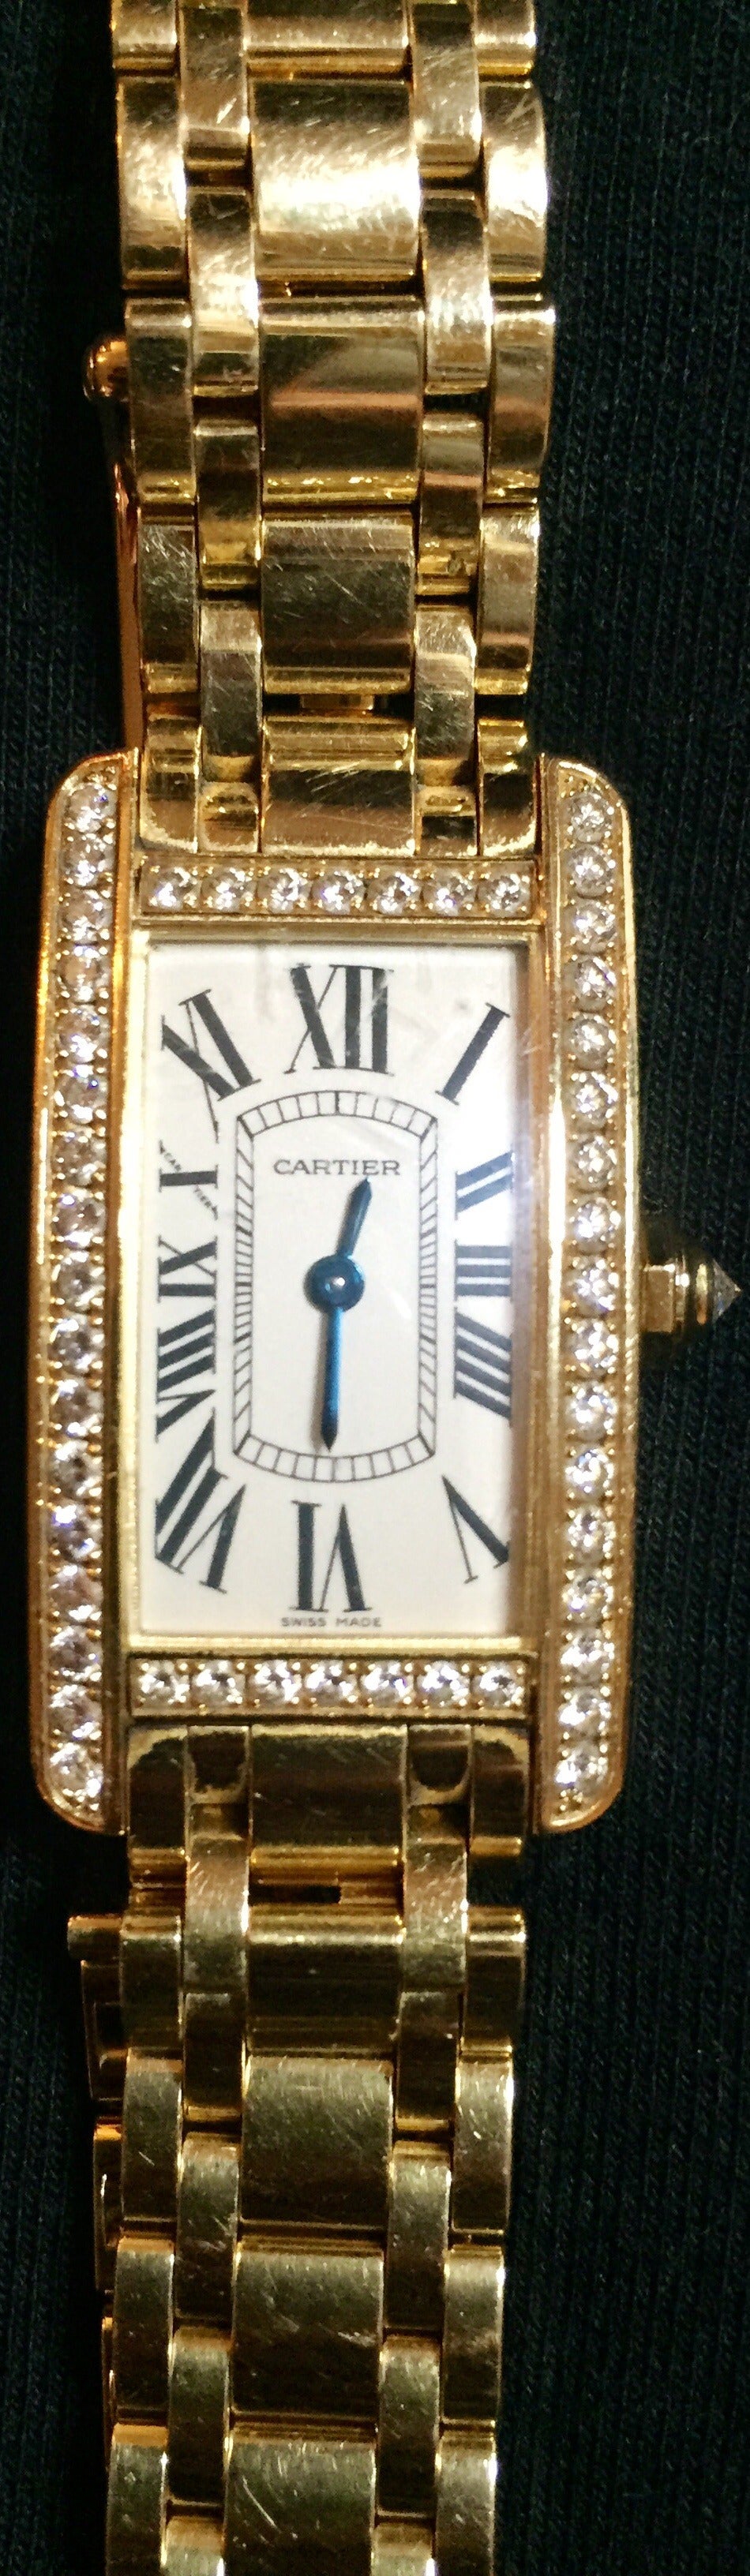 This is a gorgeous Cartier ladies 18k yellow gold watch with diamond case and Dial.
18kt yellow gold case with a 18kt yellow gold bracelet. Diamond bezel. Silver dial with sword-shaped blued steel hands and Roman numeral hour markers. Minute